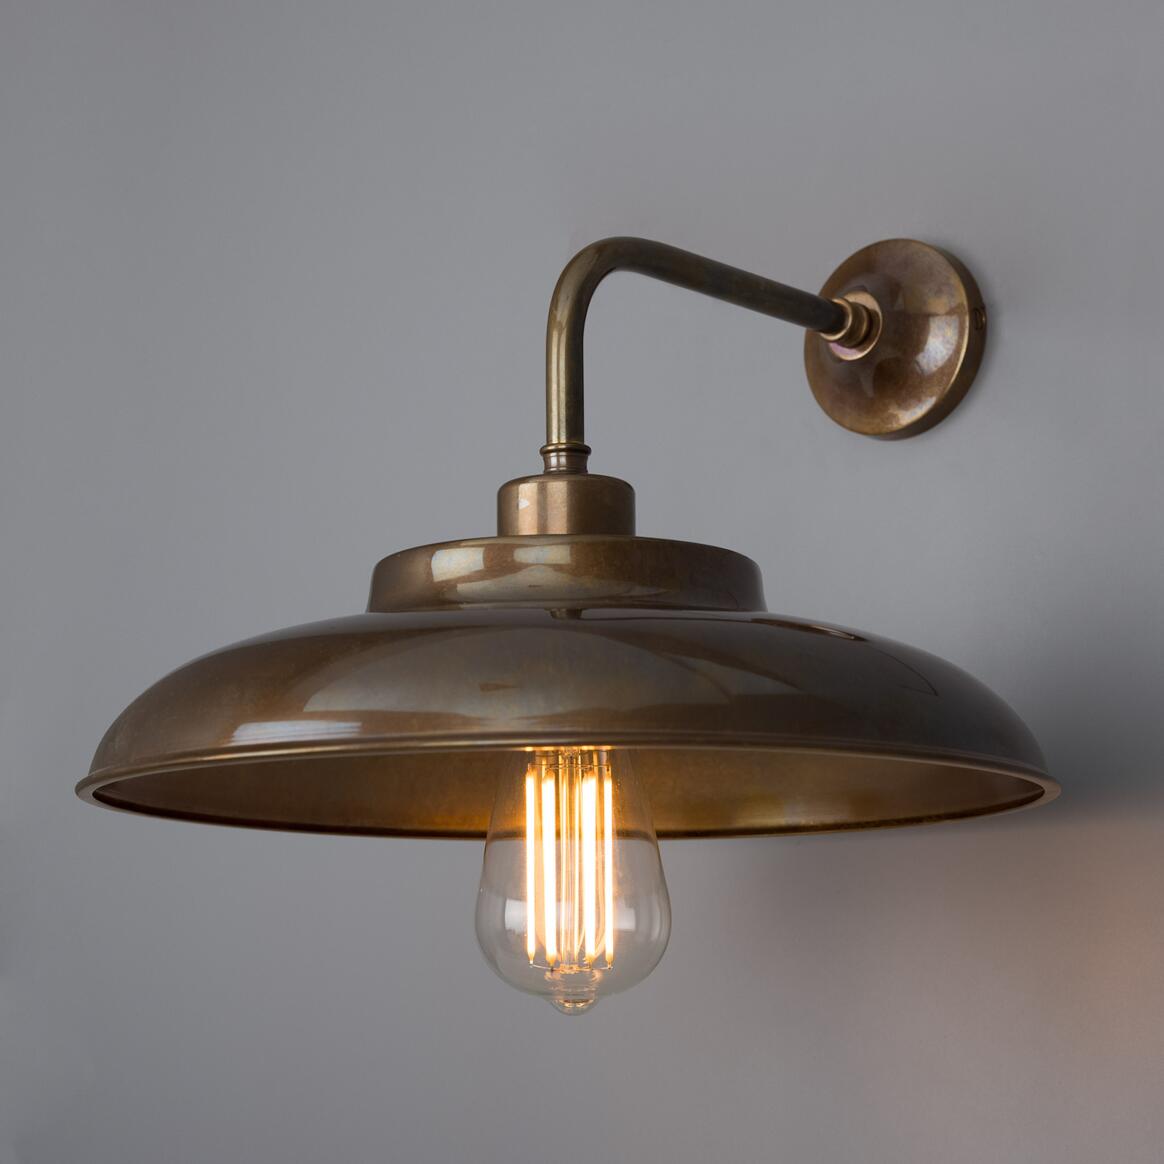 Telal Industrial Brass Factory Wall Light 12.6" main product image